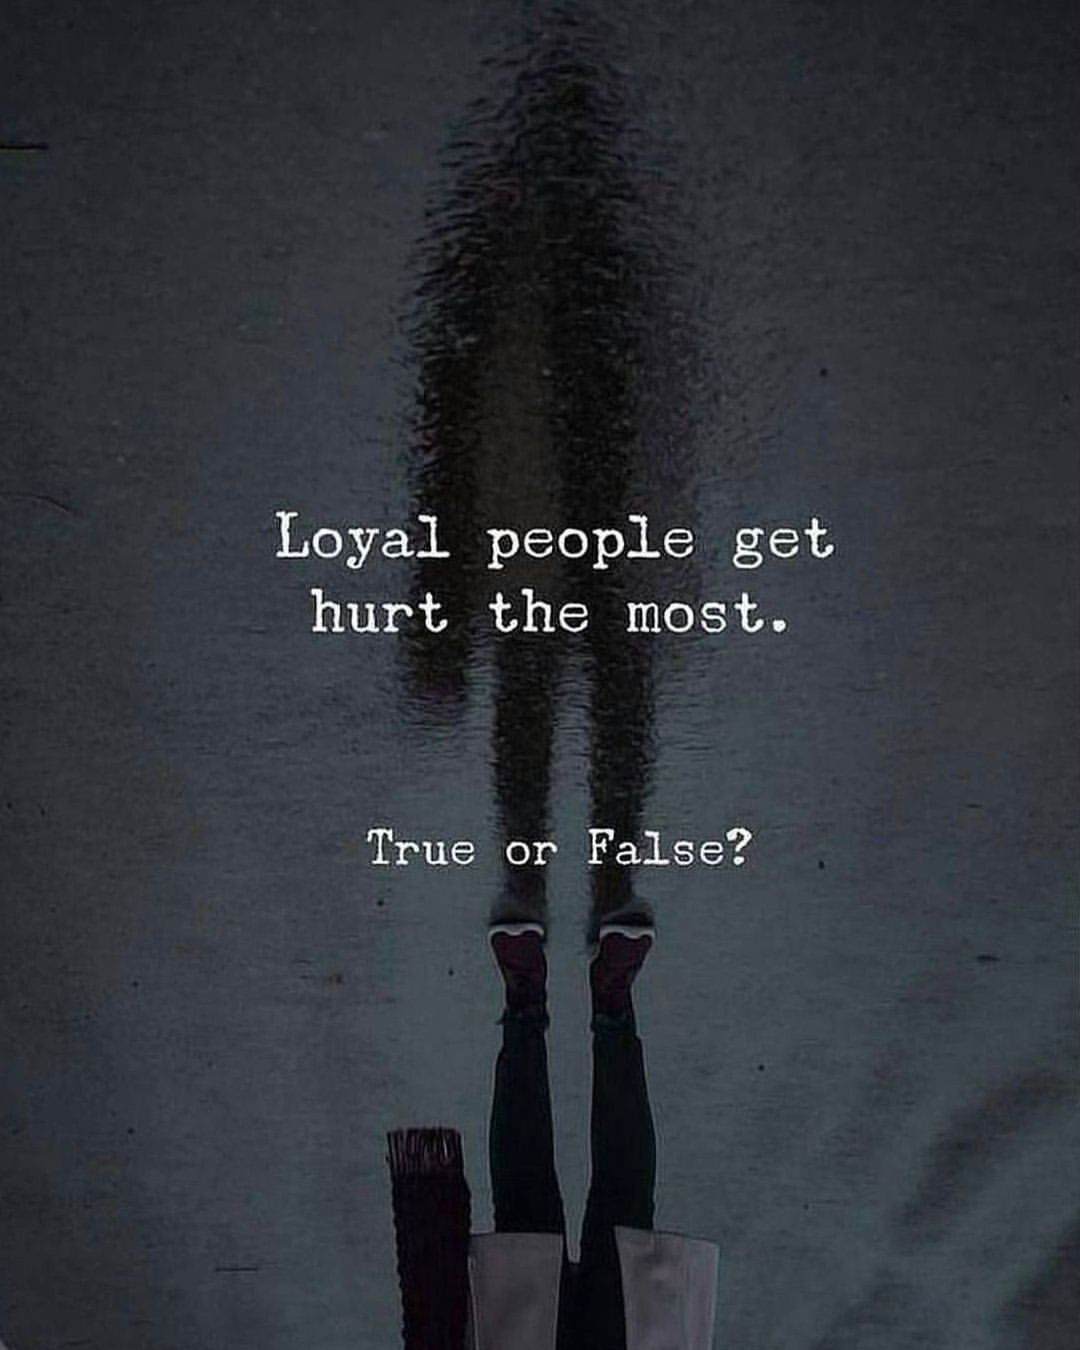 Loyal people get hurt the most. True or False?